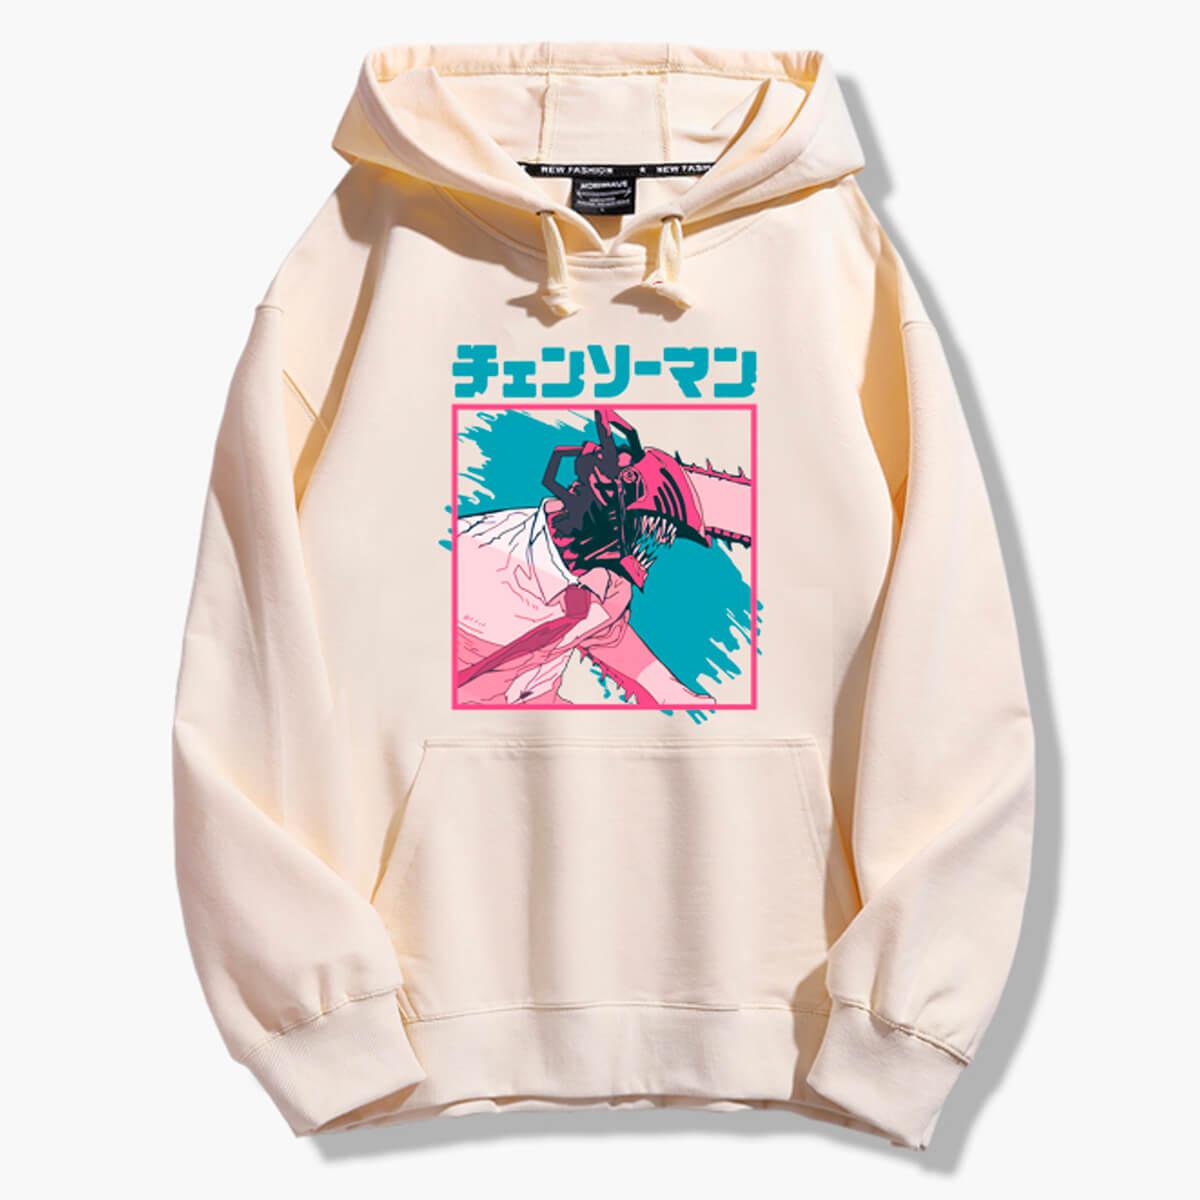 Chainsaw Man Aesthetic Hoodie - Aesthetic Clothes Shop